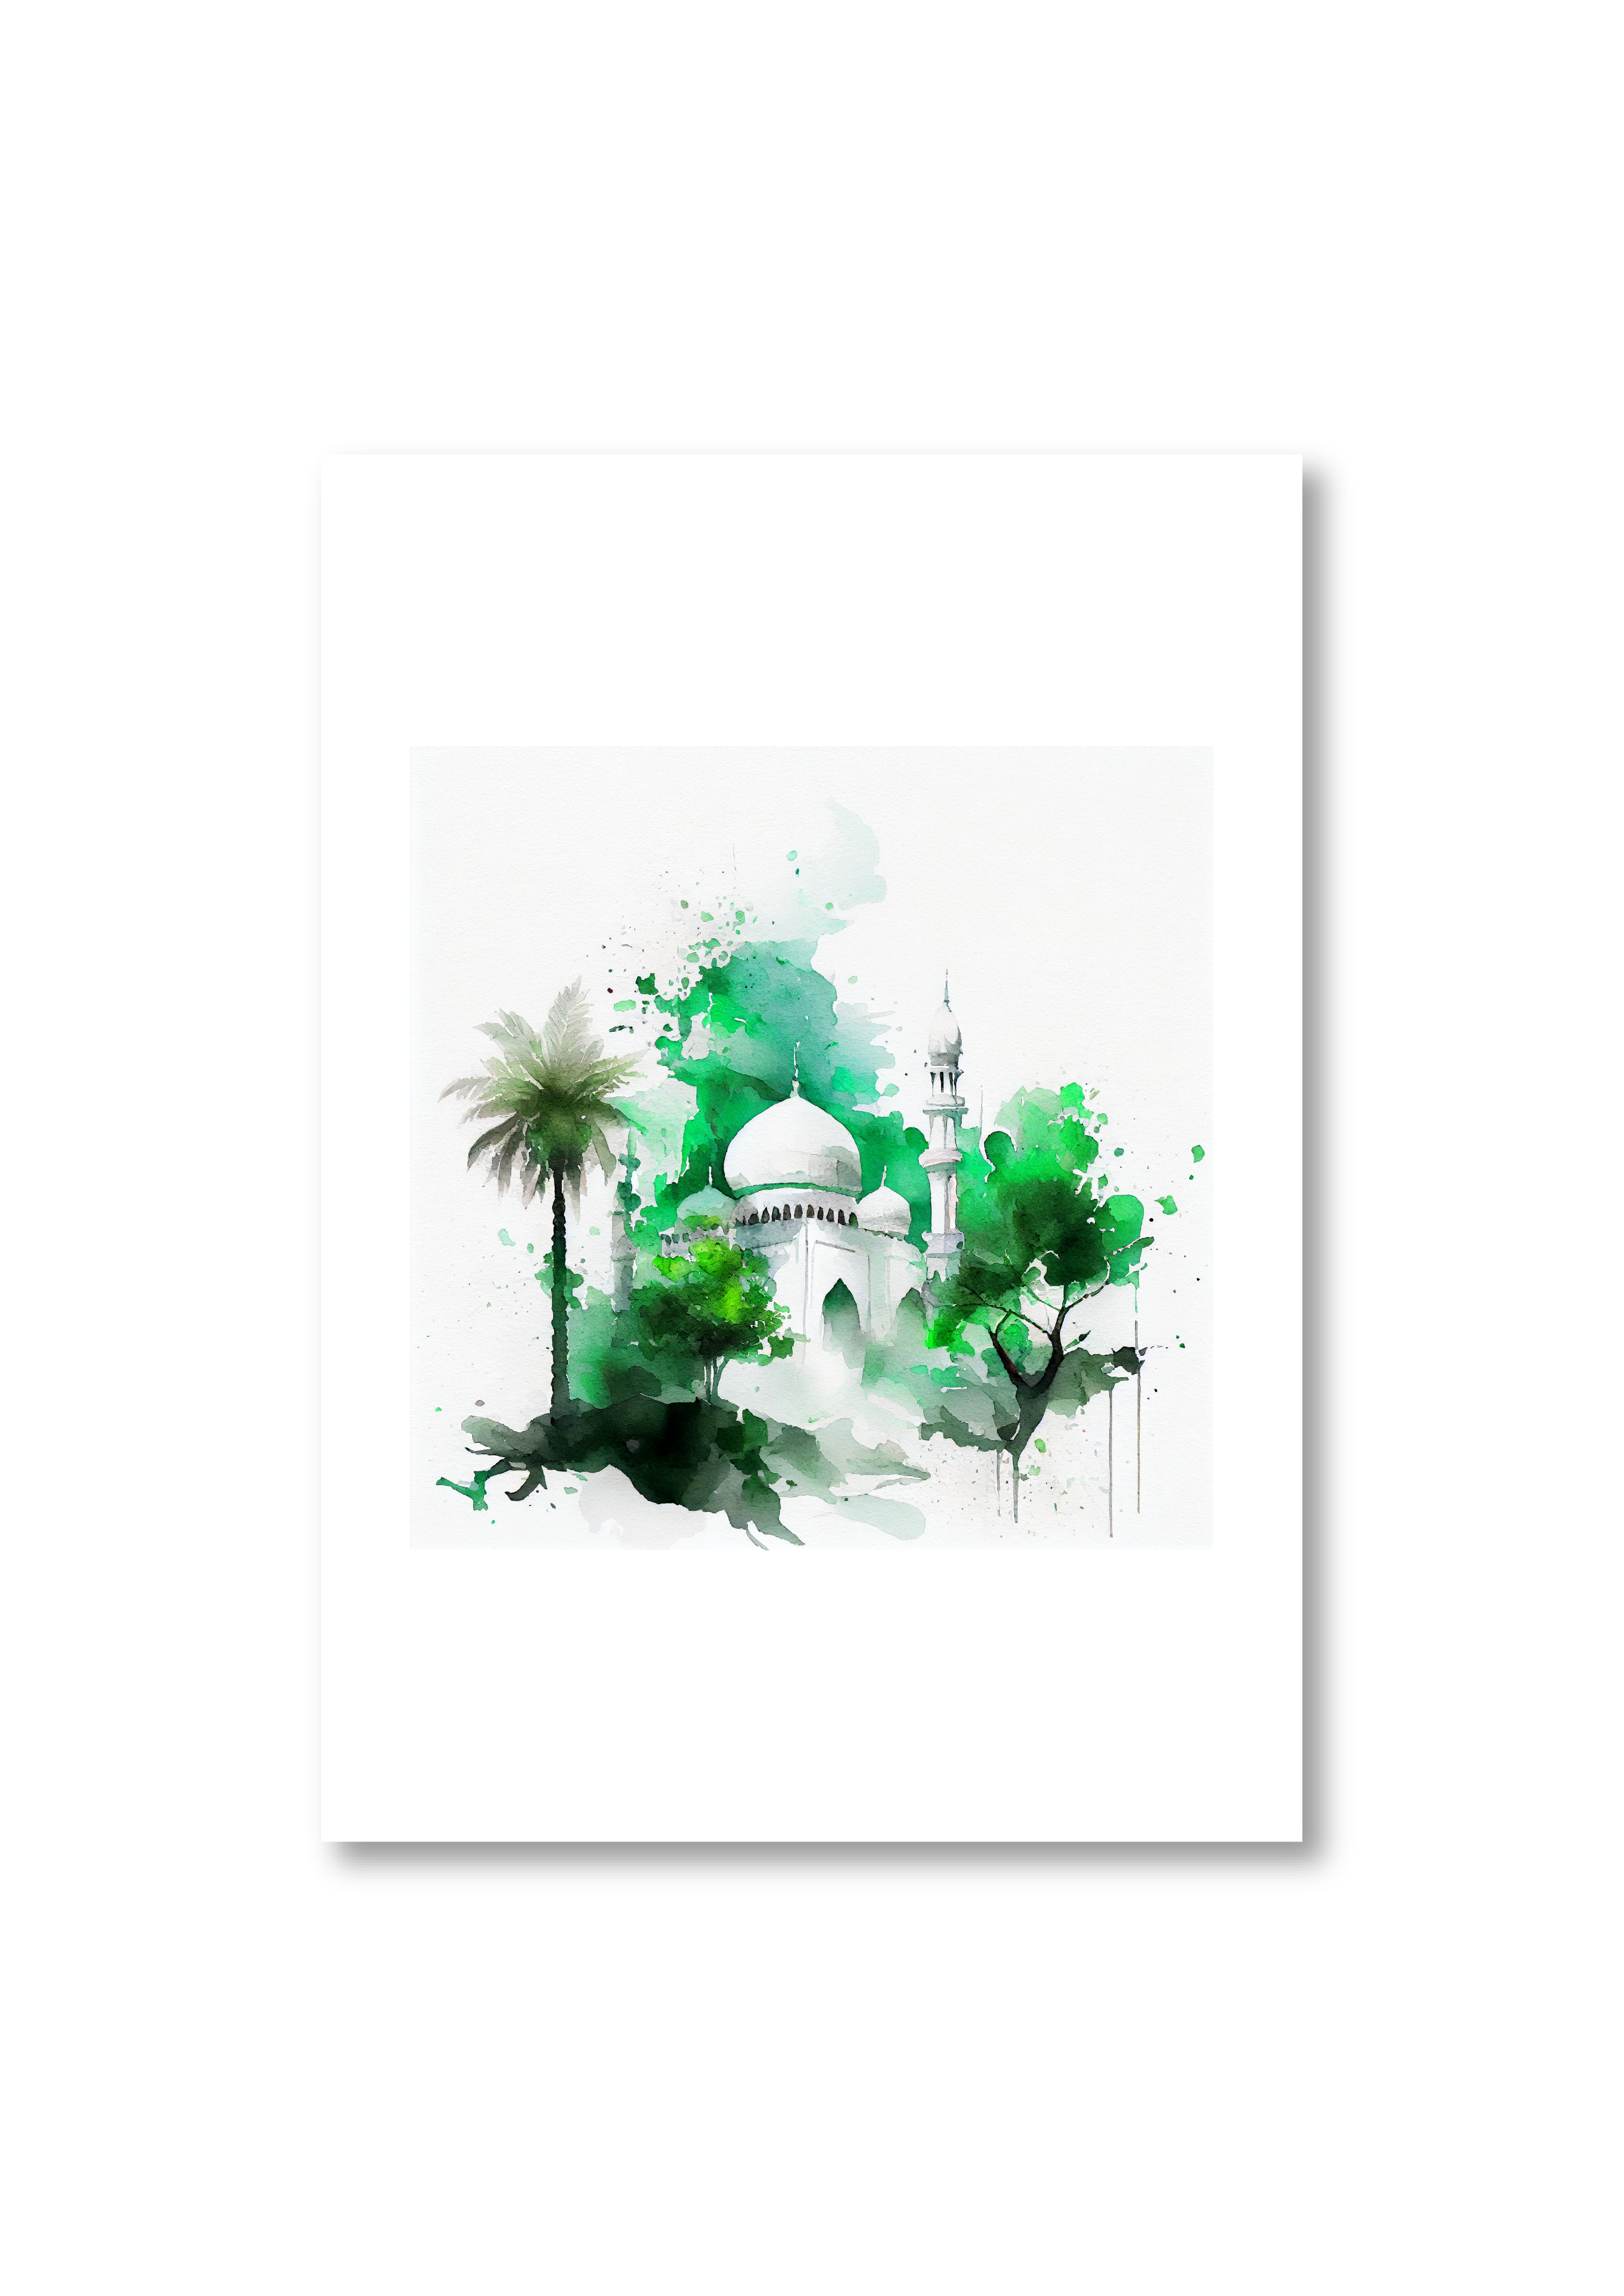 Islamic Green Mosque watercolour Painting Poster - Peaceful Arts UK